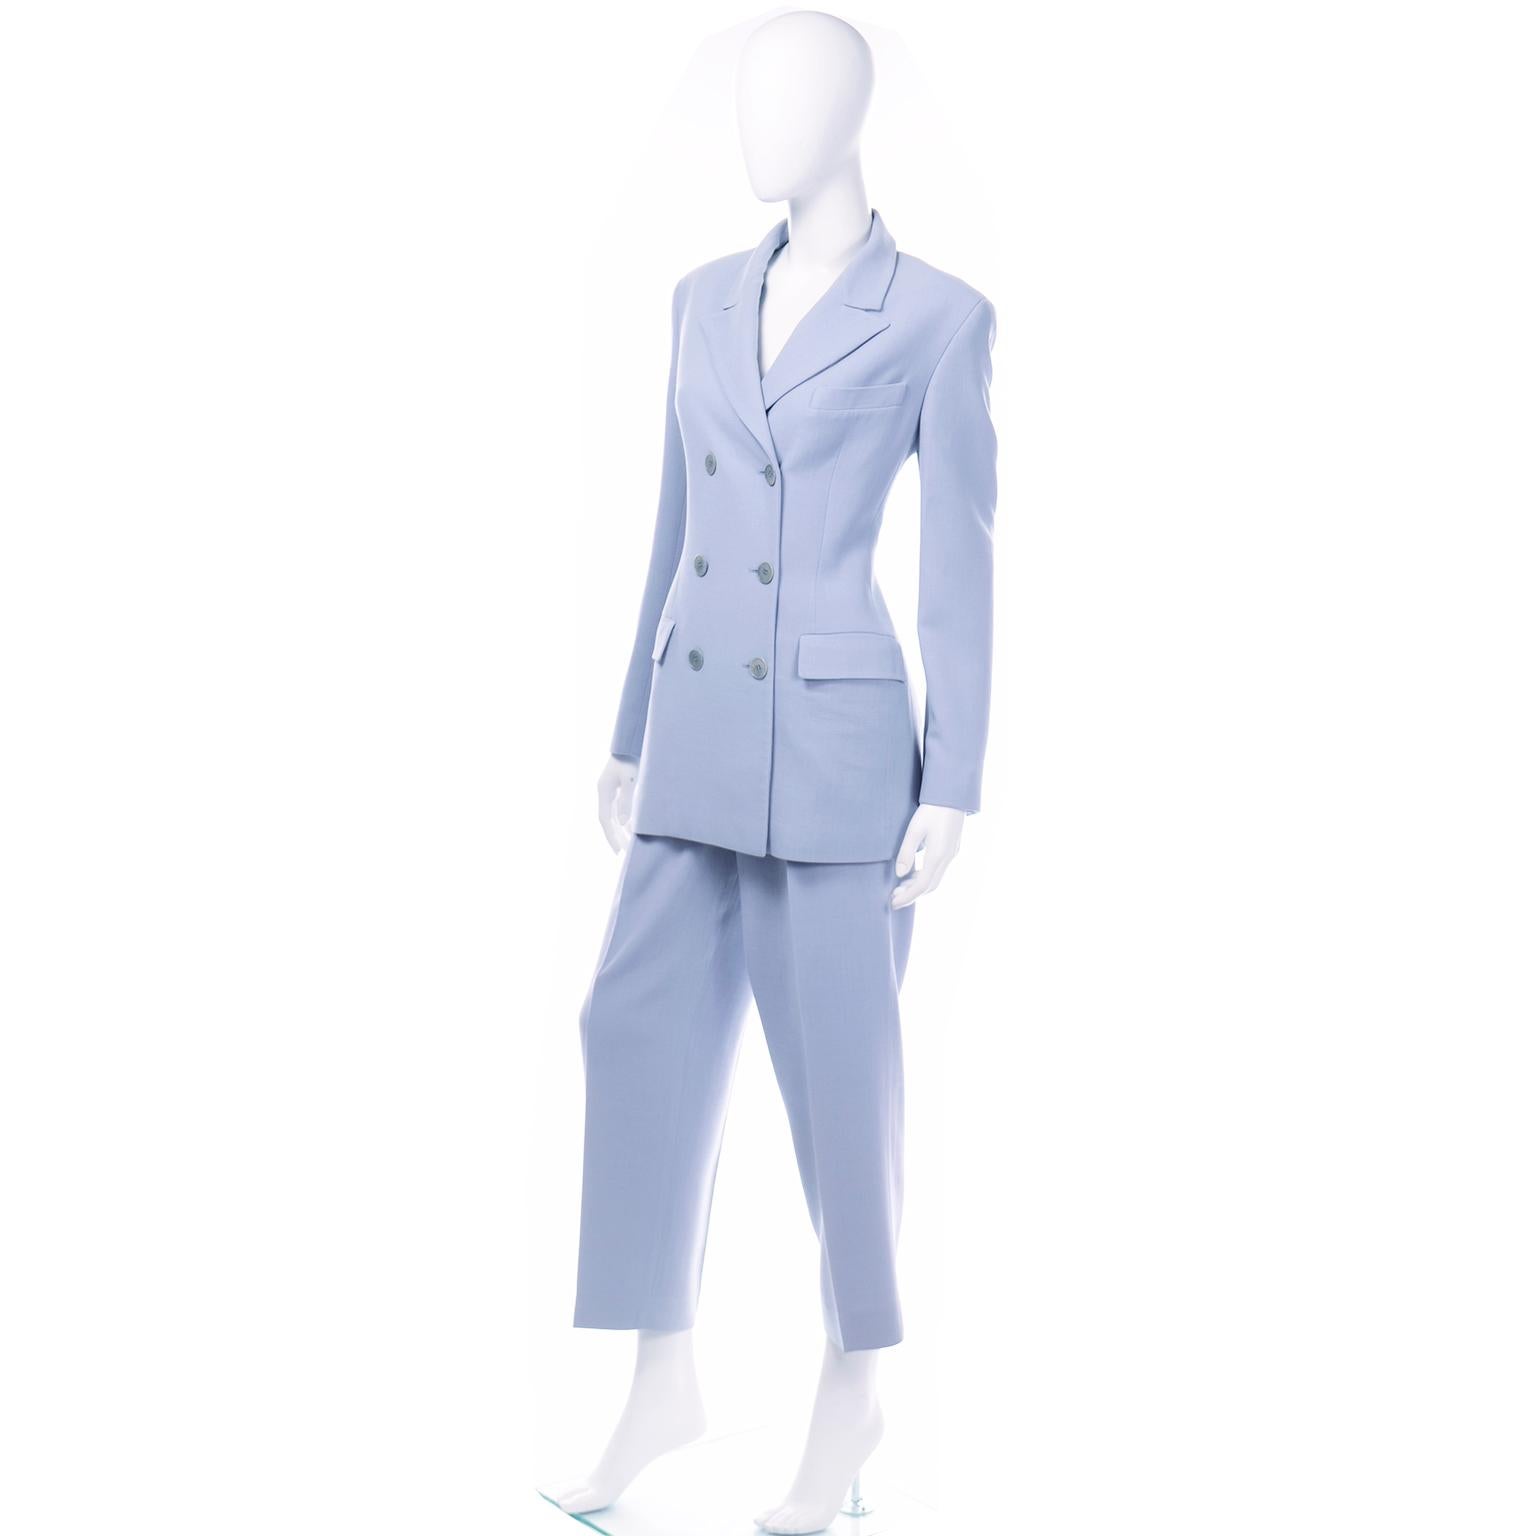 periwinkle suits